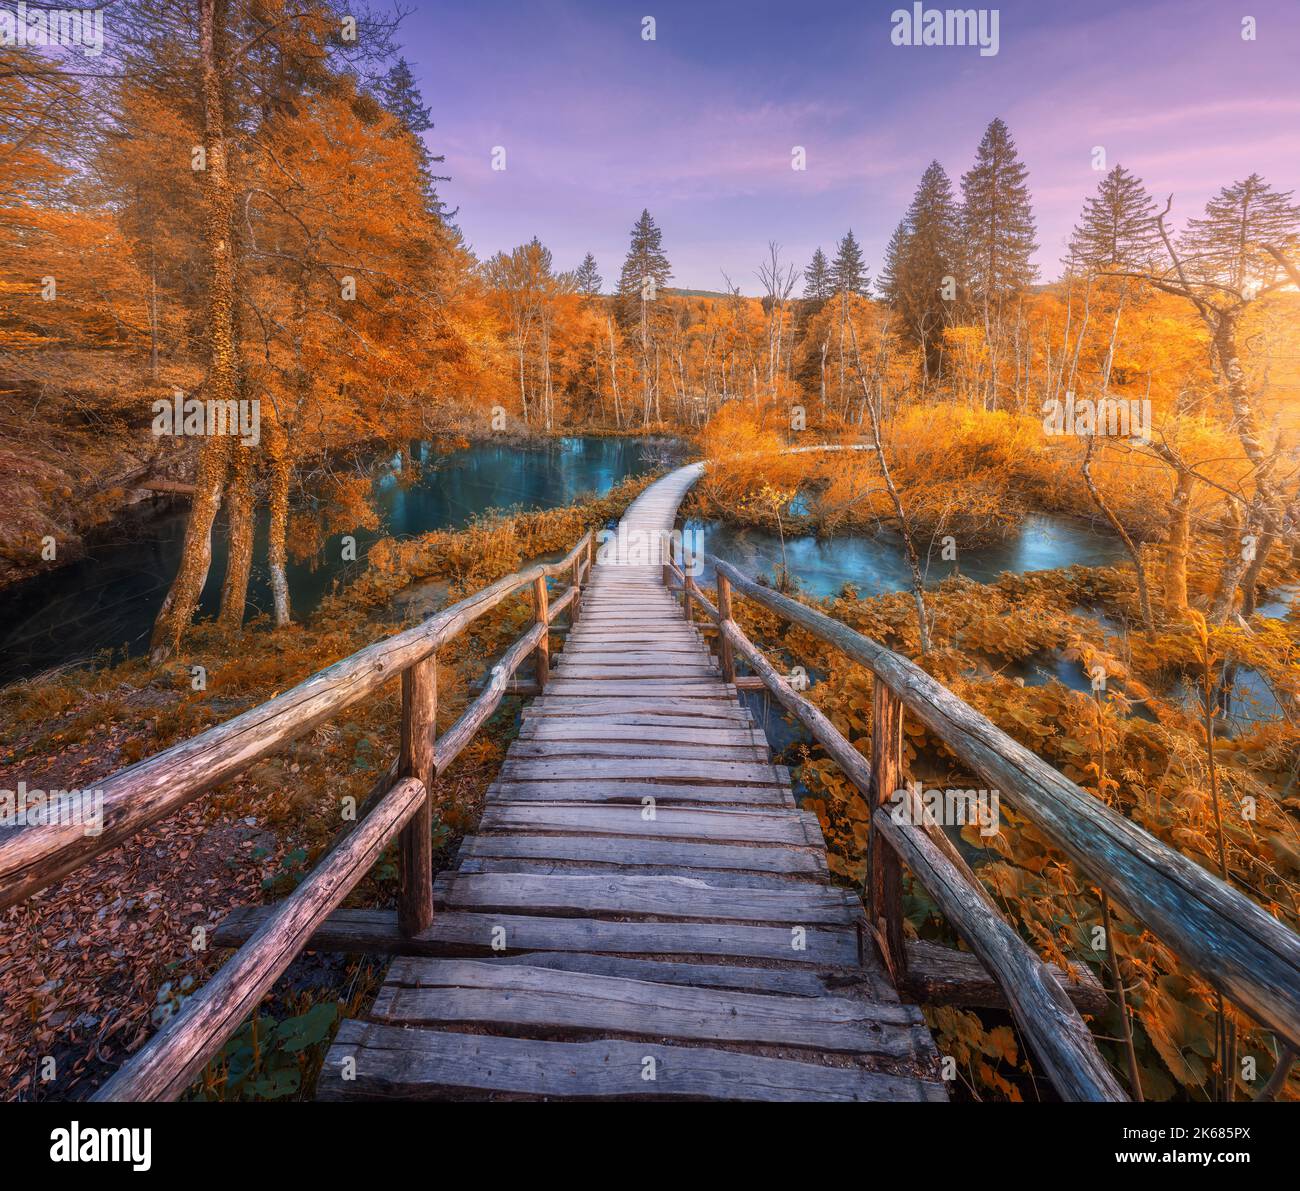 Wooden path in orange forest in Plitvice Lakes, Croatia at sunset Stock Photo